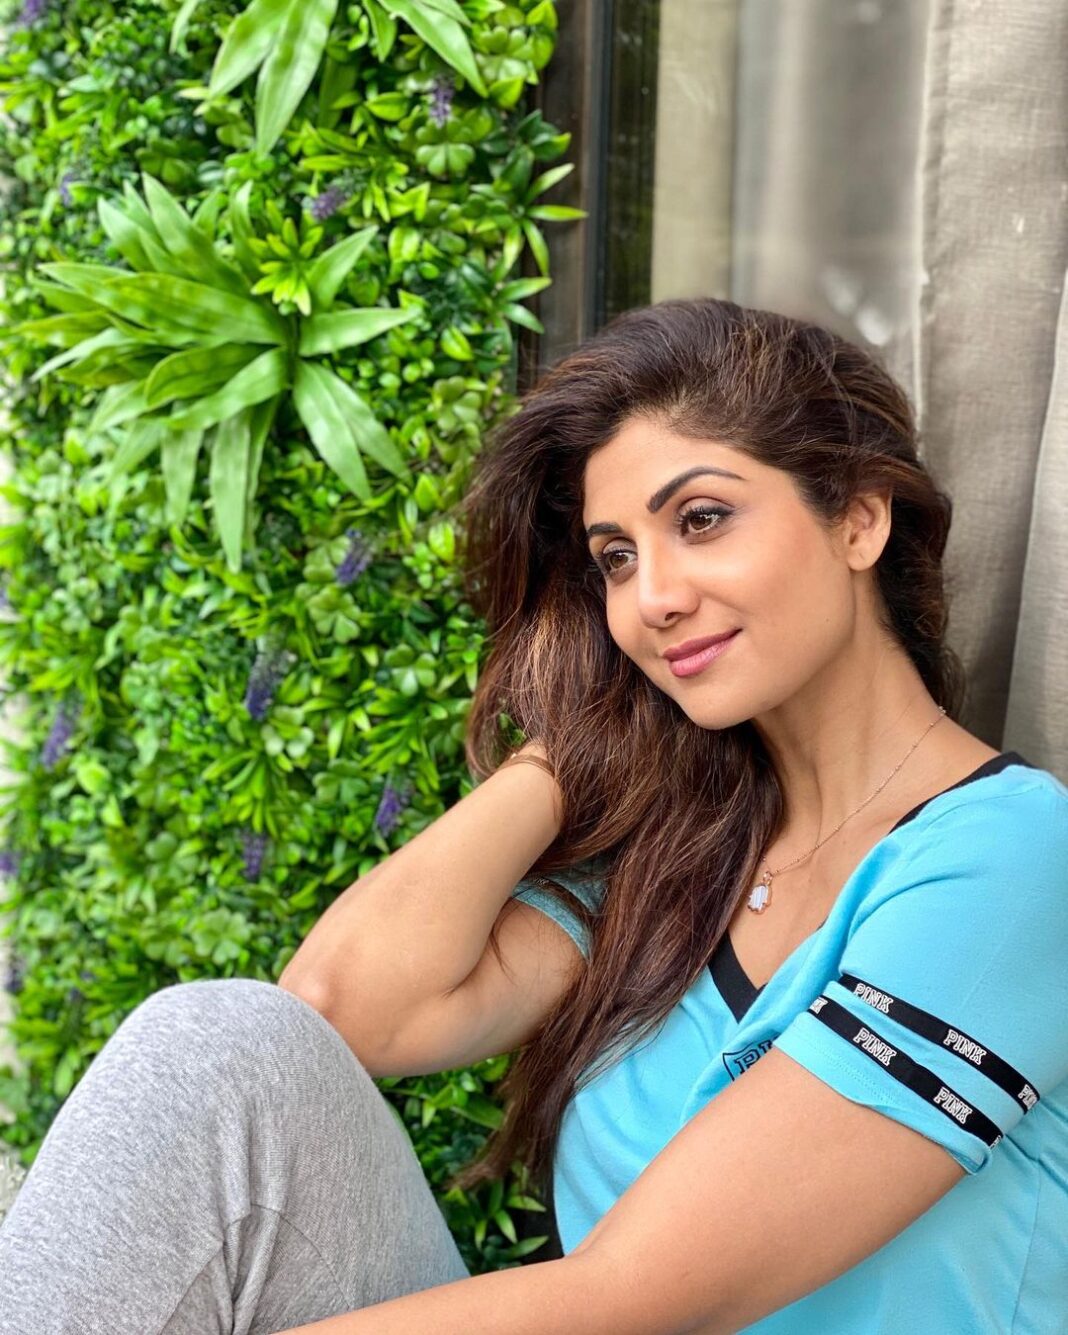 Shilpa Shetty Instagram - As we all know, the Ozone layer is a part of the Earth’s Stratosphere responsible for absorbing most of the UV rays emitted by the Sun. It is the shield 🛡 protecting the Earth and the life on it. When we abuse the natural and man-made resources available to us, we end up damaging the ozone layer. Saving our planet from the adverse effects of our own actions is our responsibility. While a part of the ozone layer has been healing because we’re all indoors, we still have a long way to go. This year, as we celebrate 35 years of the global ozone layer protection, let’s pledge to be mindful of our actions, plant more trees, reduce our carbon footprint, and teach our next generations to do the same. The onus of what we leave behind for our future generations is completely on us. Let’s work towards a better tomorrow because we all need ‘Ozone For Life’ 😊🌍 . . . . . #WorldOzoneDay2020 #OzoneForLife #environment #nature #bettertomorrow #gratitude #LetsDoOurBit